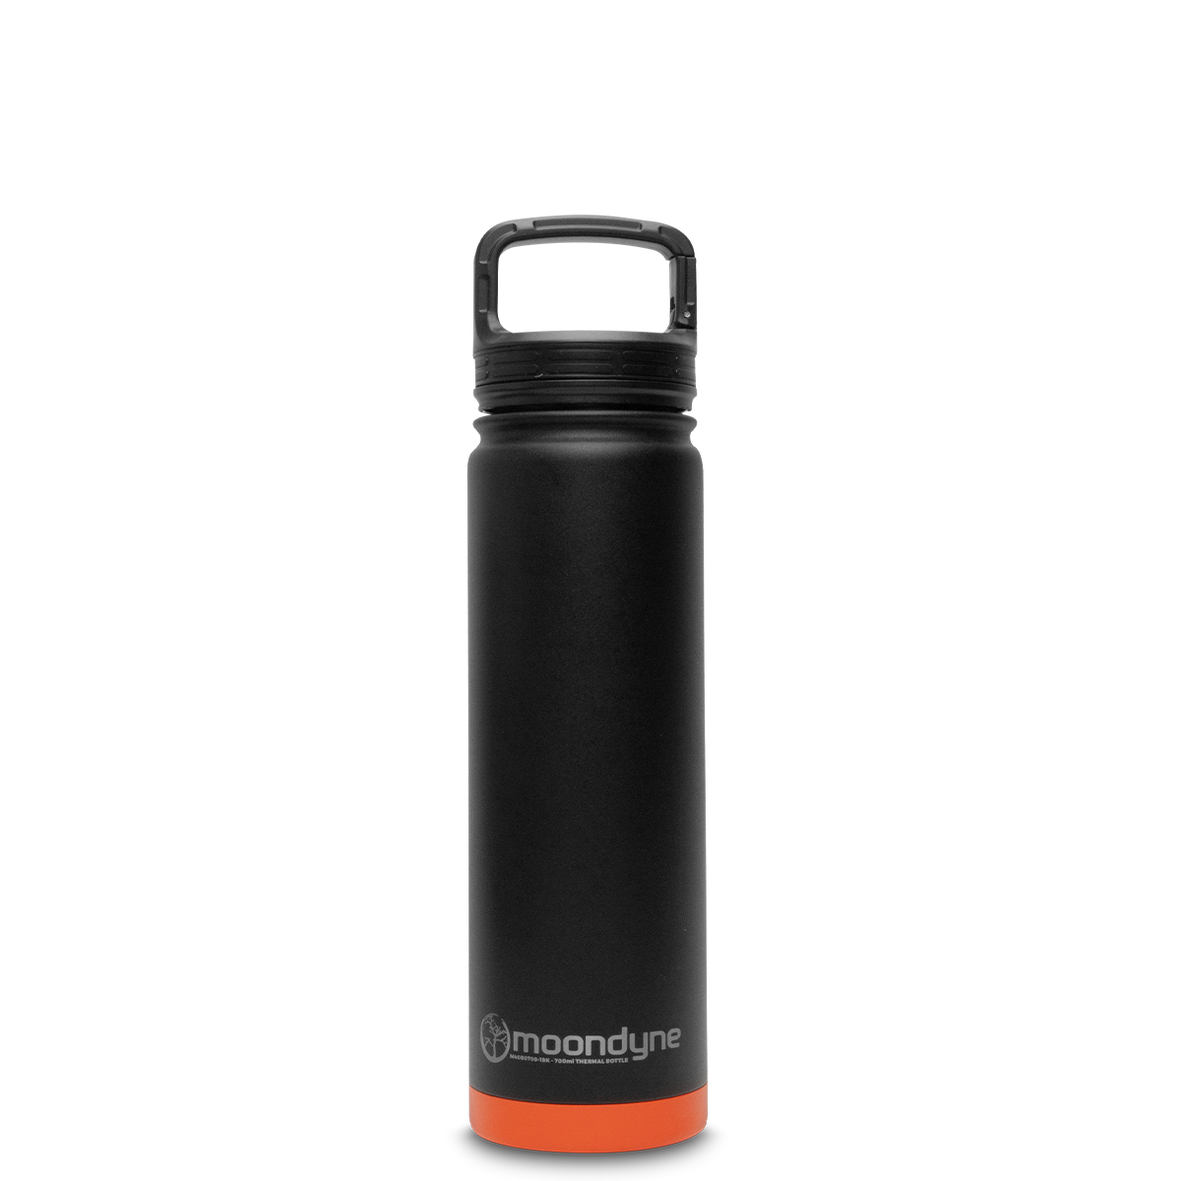 700ml Insulated Thermal Drink Bottle by Moondyne